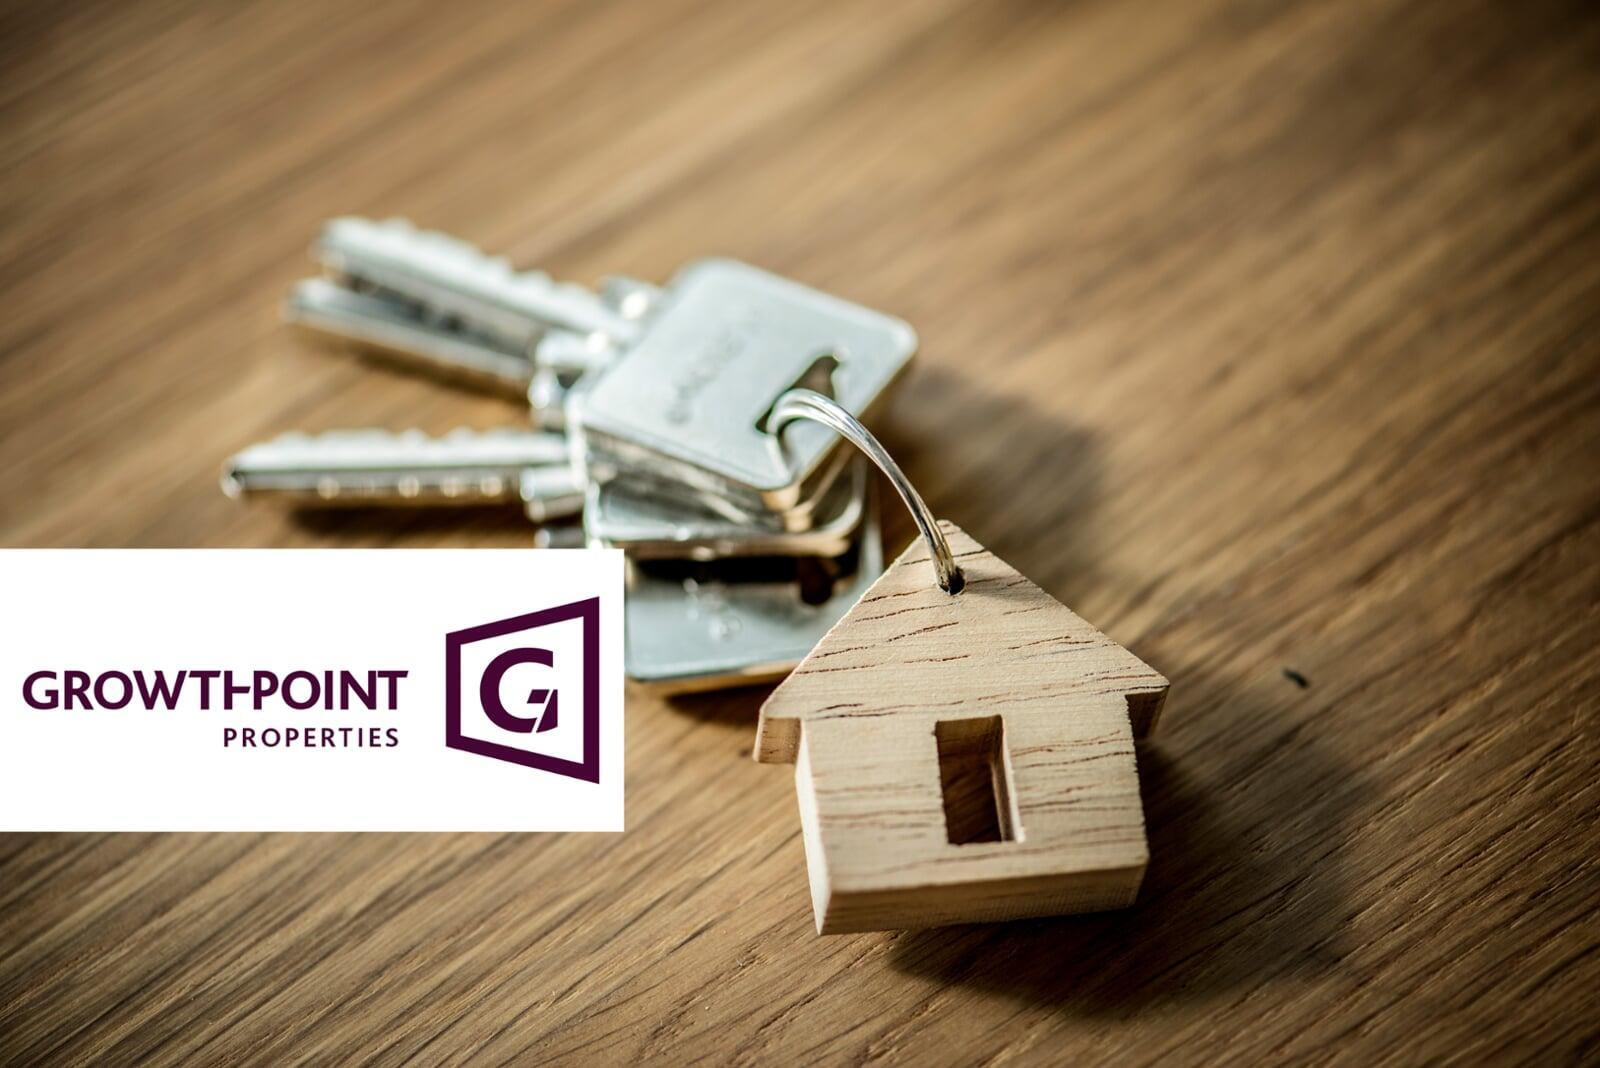 Growthpoint Properties Case Study